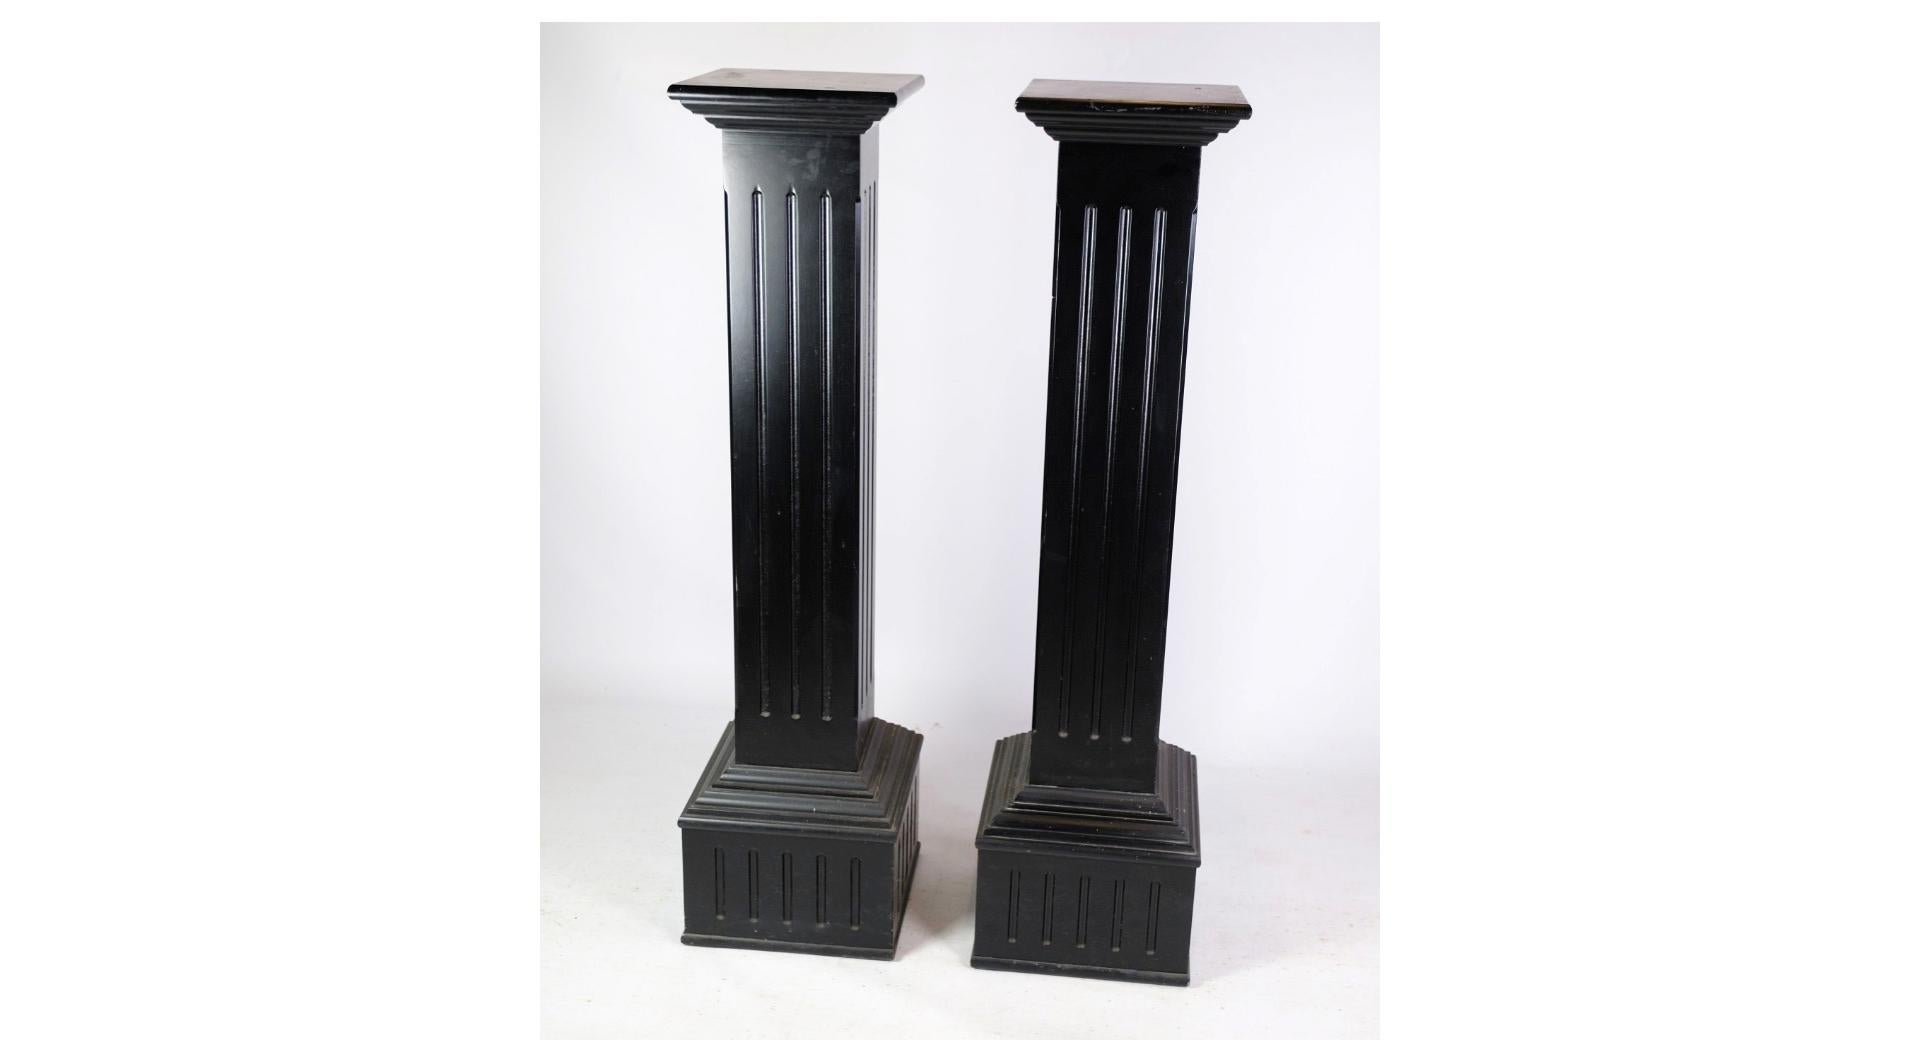 The pedestals with black paint, designed in the Louis Seize style from around the 1980s, are a striking fusion of classic elegance and contemporary flair. Inspired by the opulent aesthetic of 18th-century French design, these pedestals feature